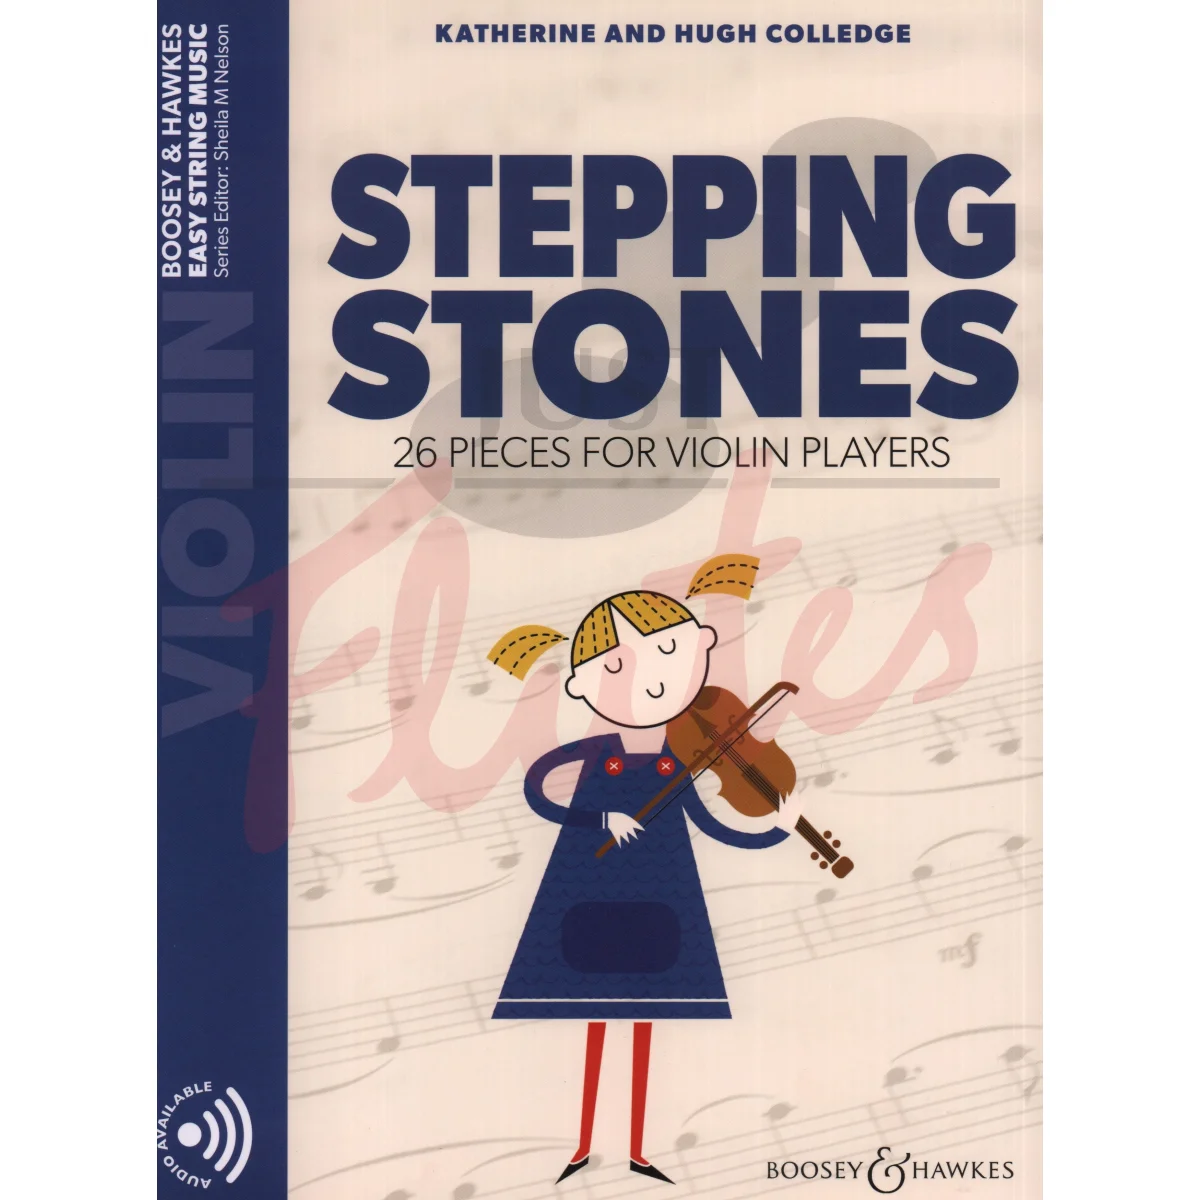 Stepping Stones for Violin